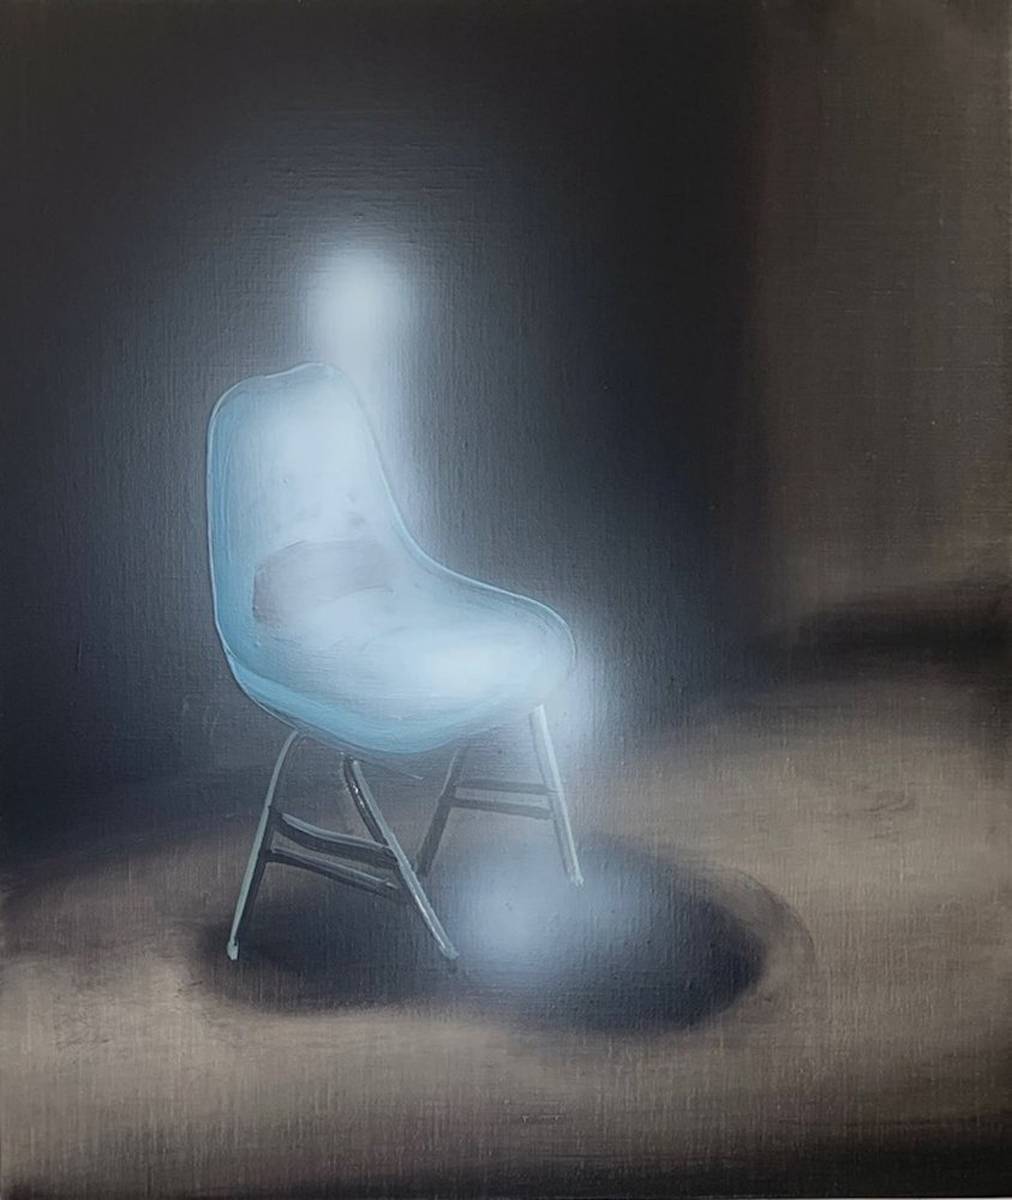 Tala Madani, Ghost Sitter (blue chair), 2020. Oil on linen, 50,8 x 43,2 x 2,5 cm. Courtesy of the artist and Pilar Corrias (London). Photo credit: Flying Studio (Los Angeles)  